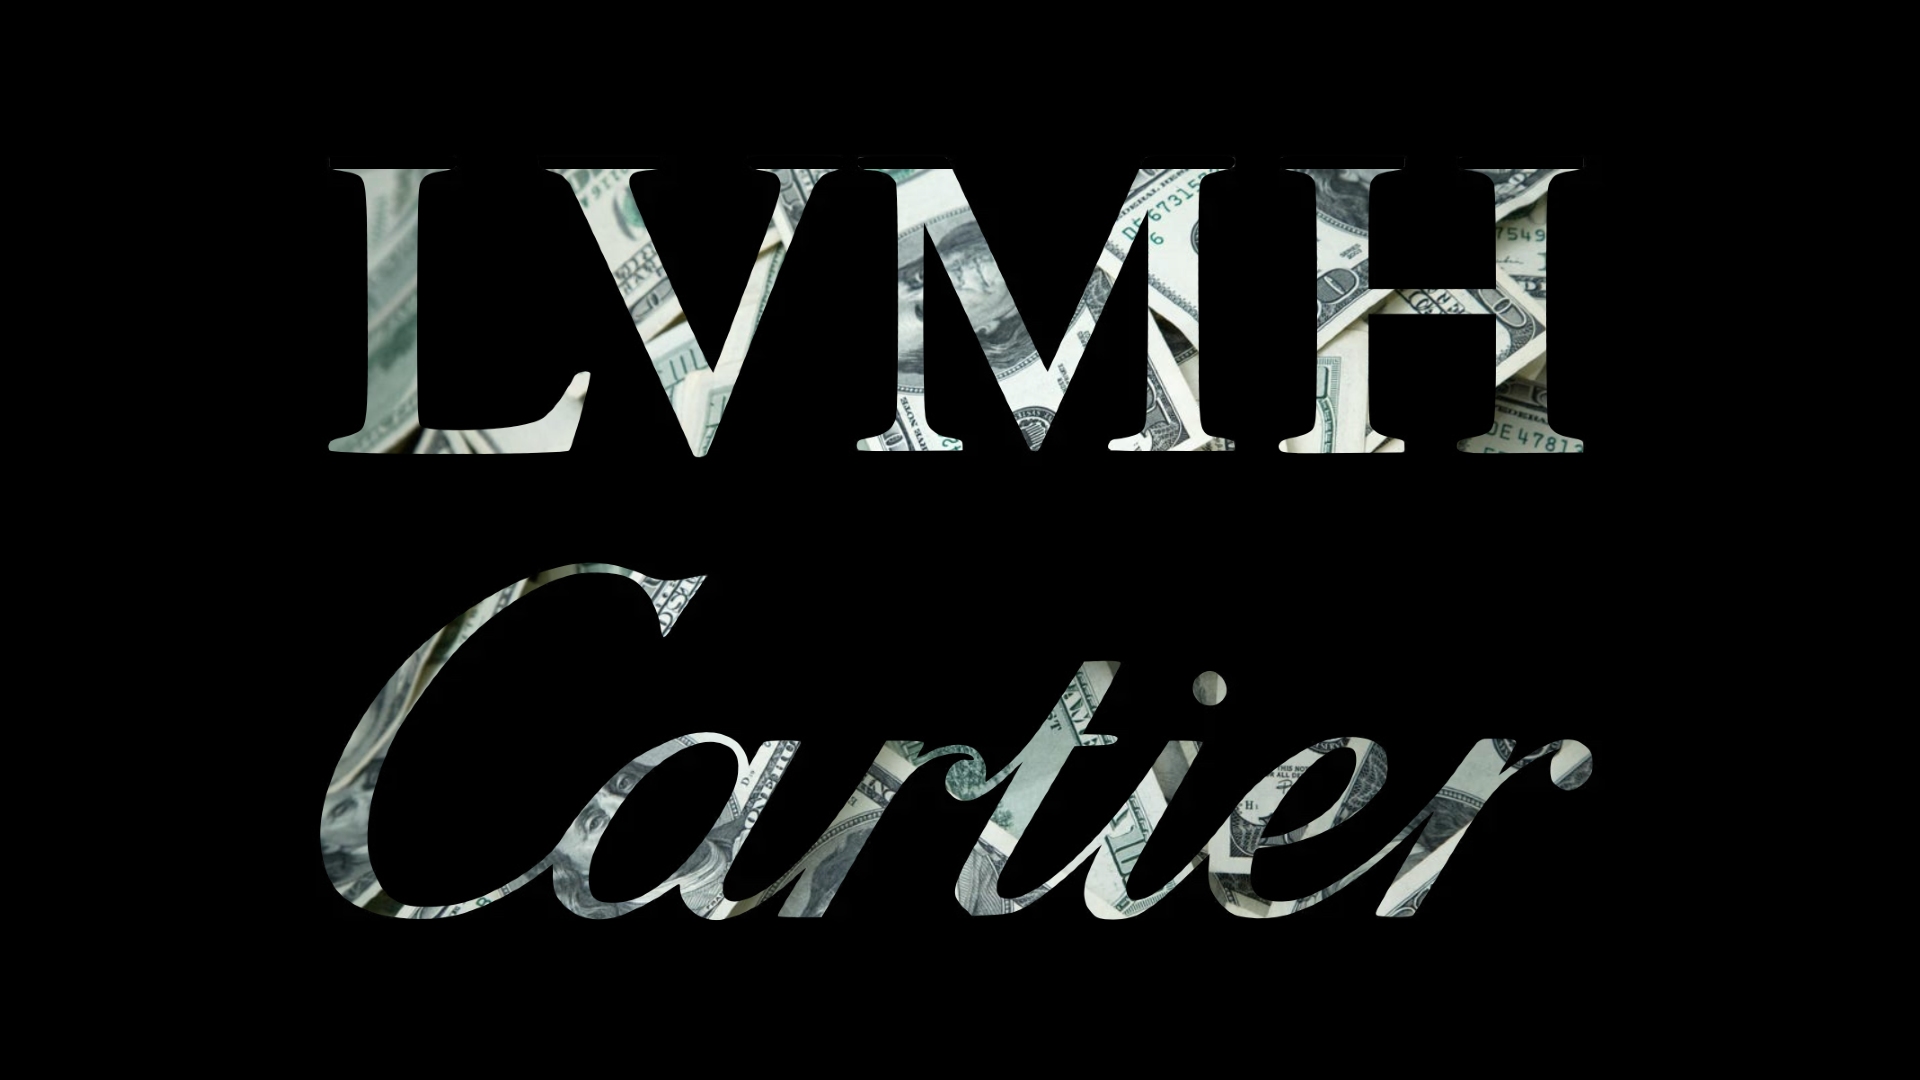 LVMH reportedly considering Cartier takeover to extend jewellery portfolio  